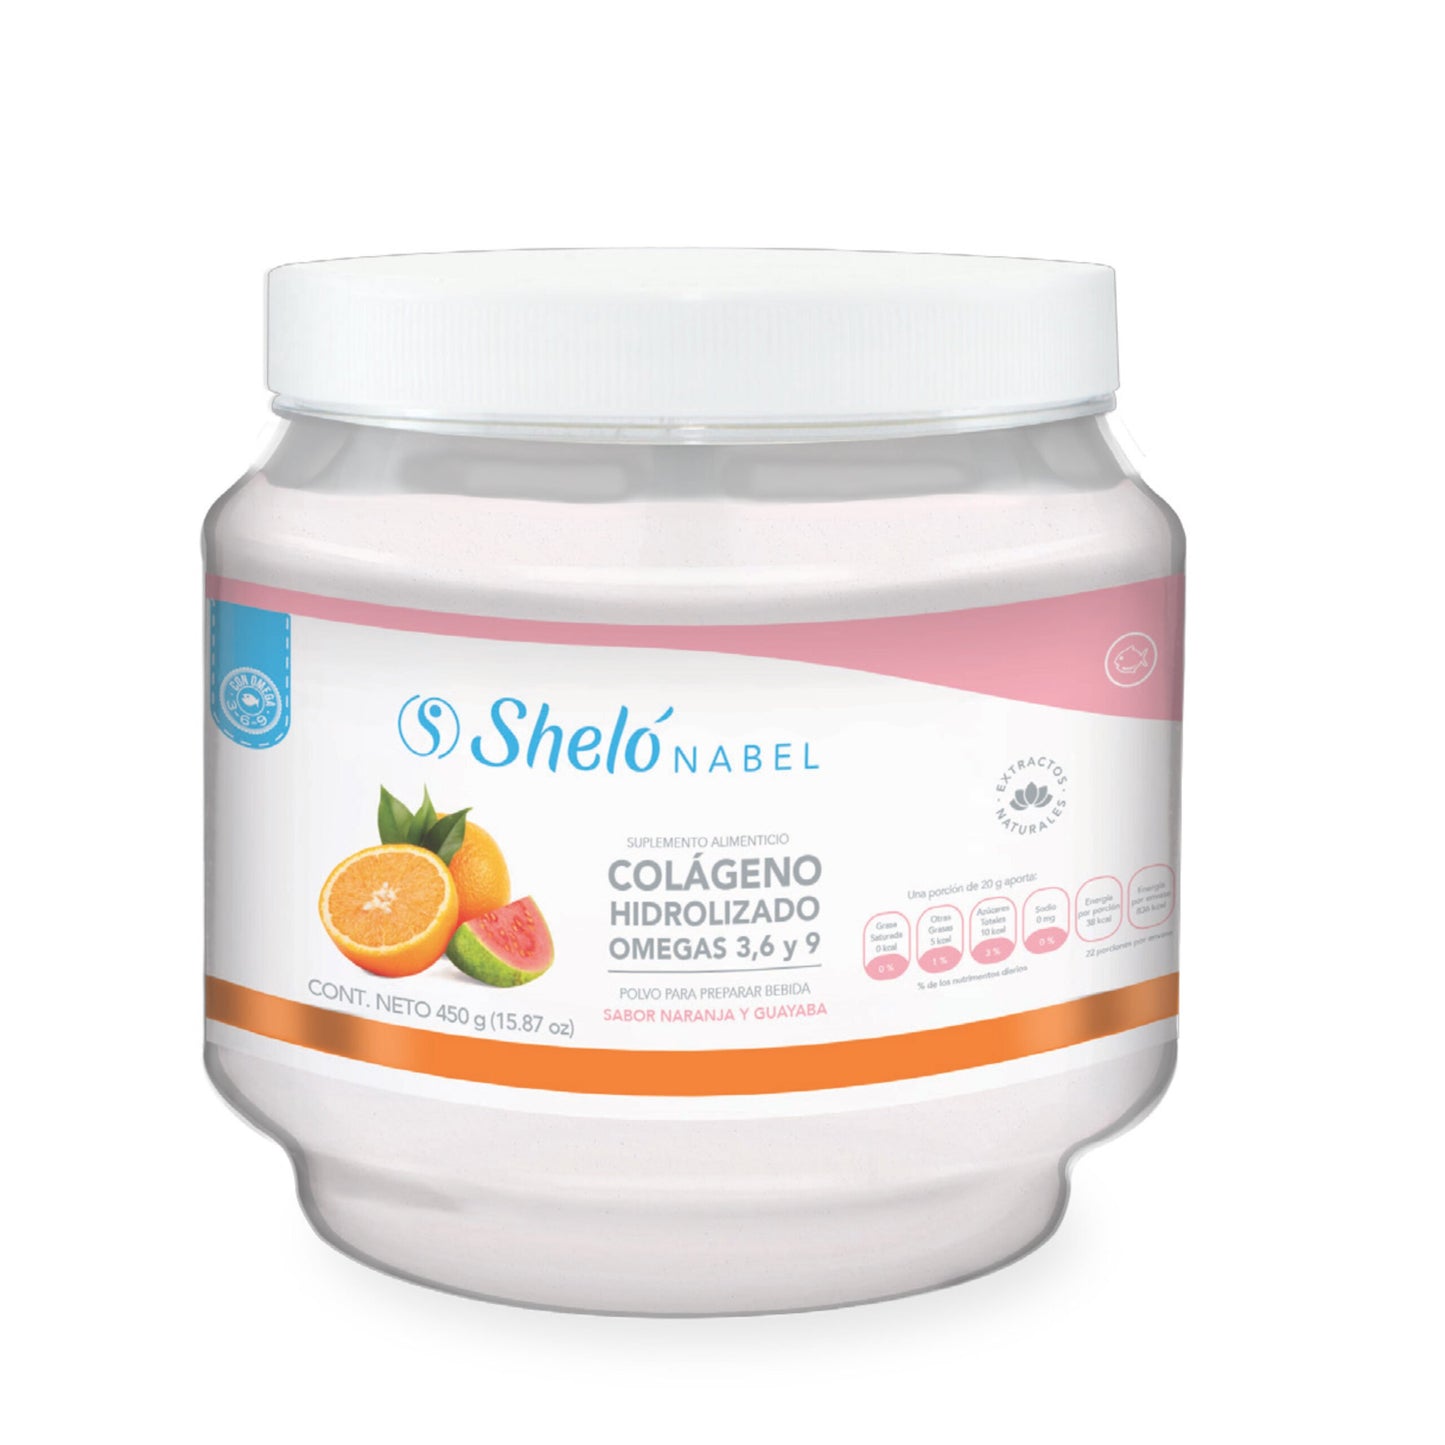 HYDROLYZED COLLAGEN OMEGAS 3, 6 AND 9 ORANGE GUAVA FLAVOR